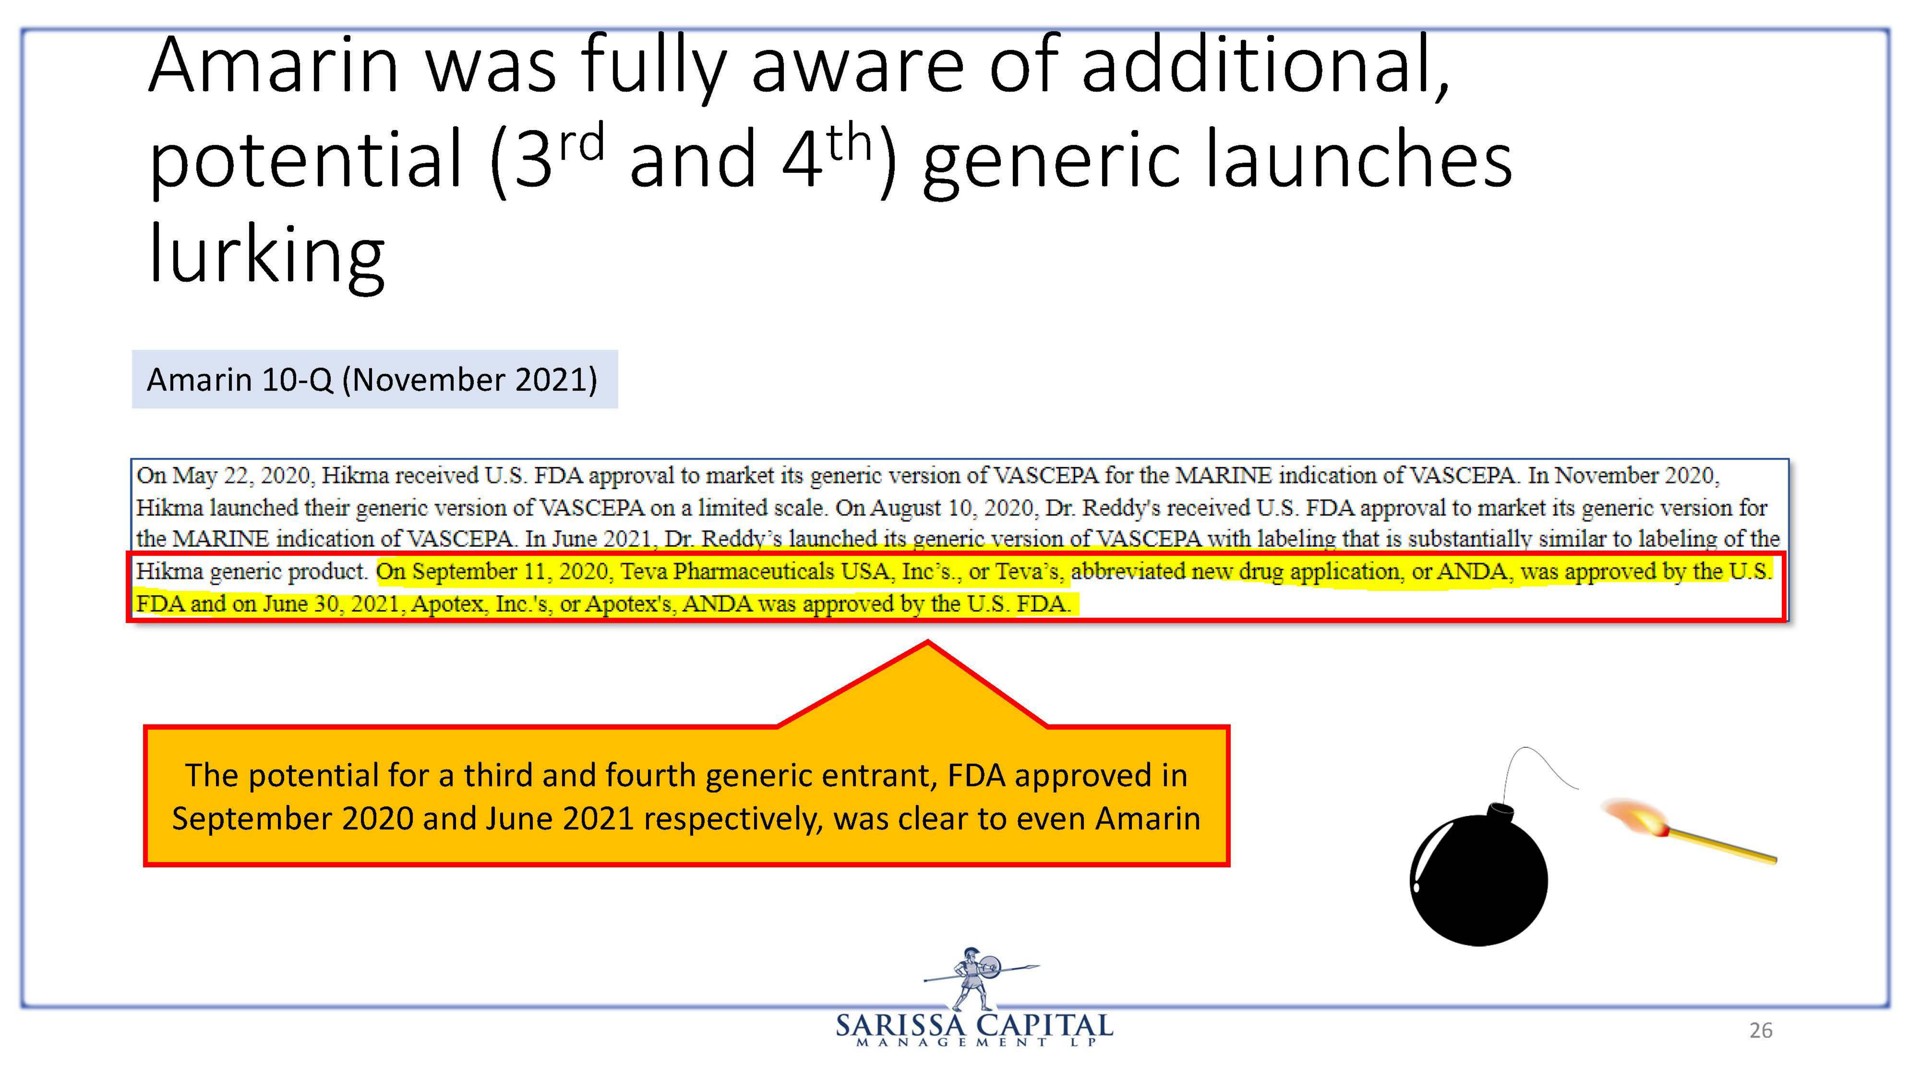 amarin was aware of additional potential and generic launches lurking | Sarissa Capital